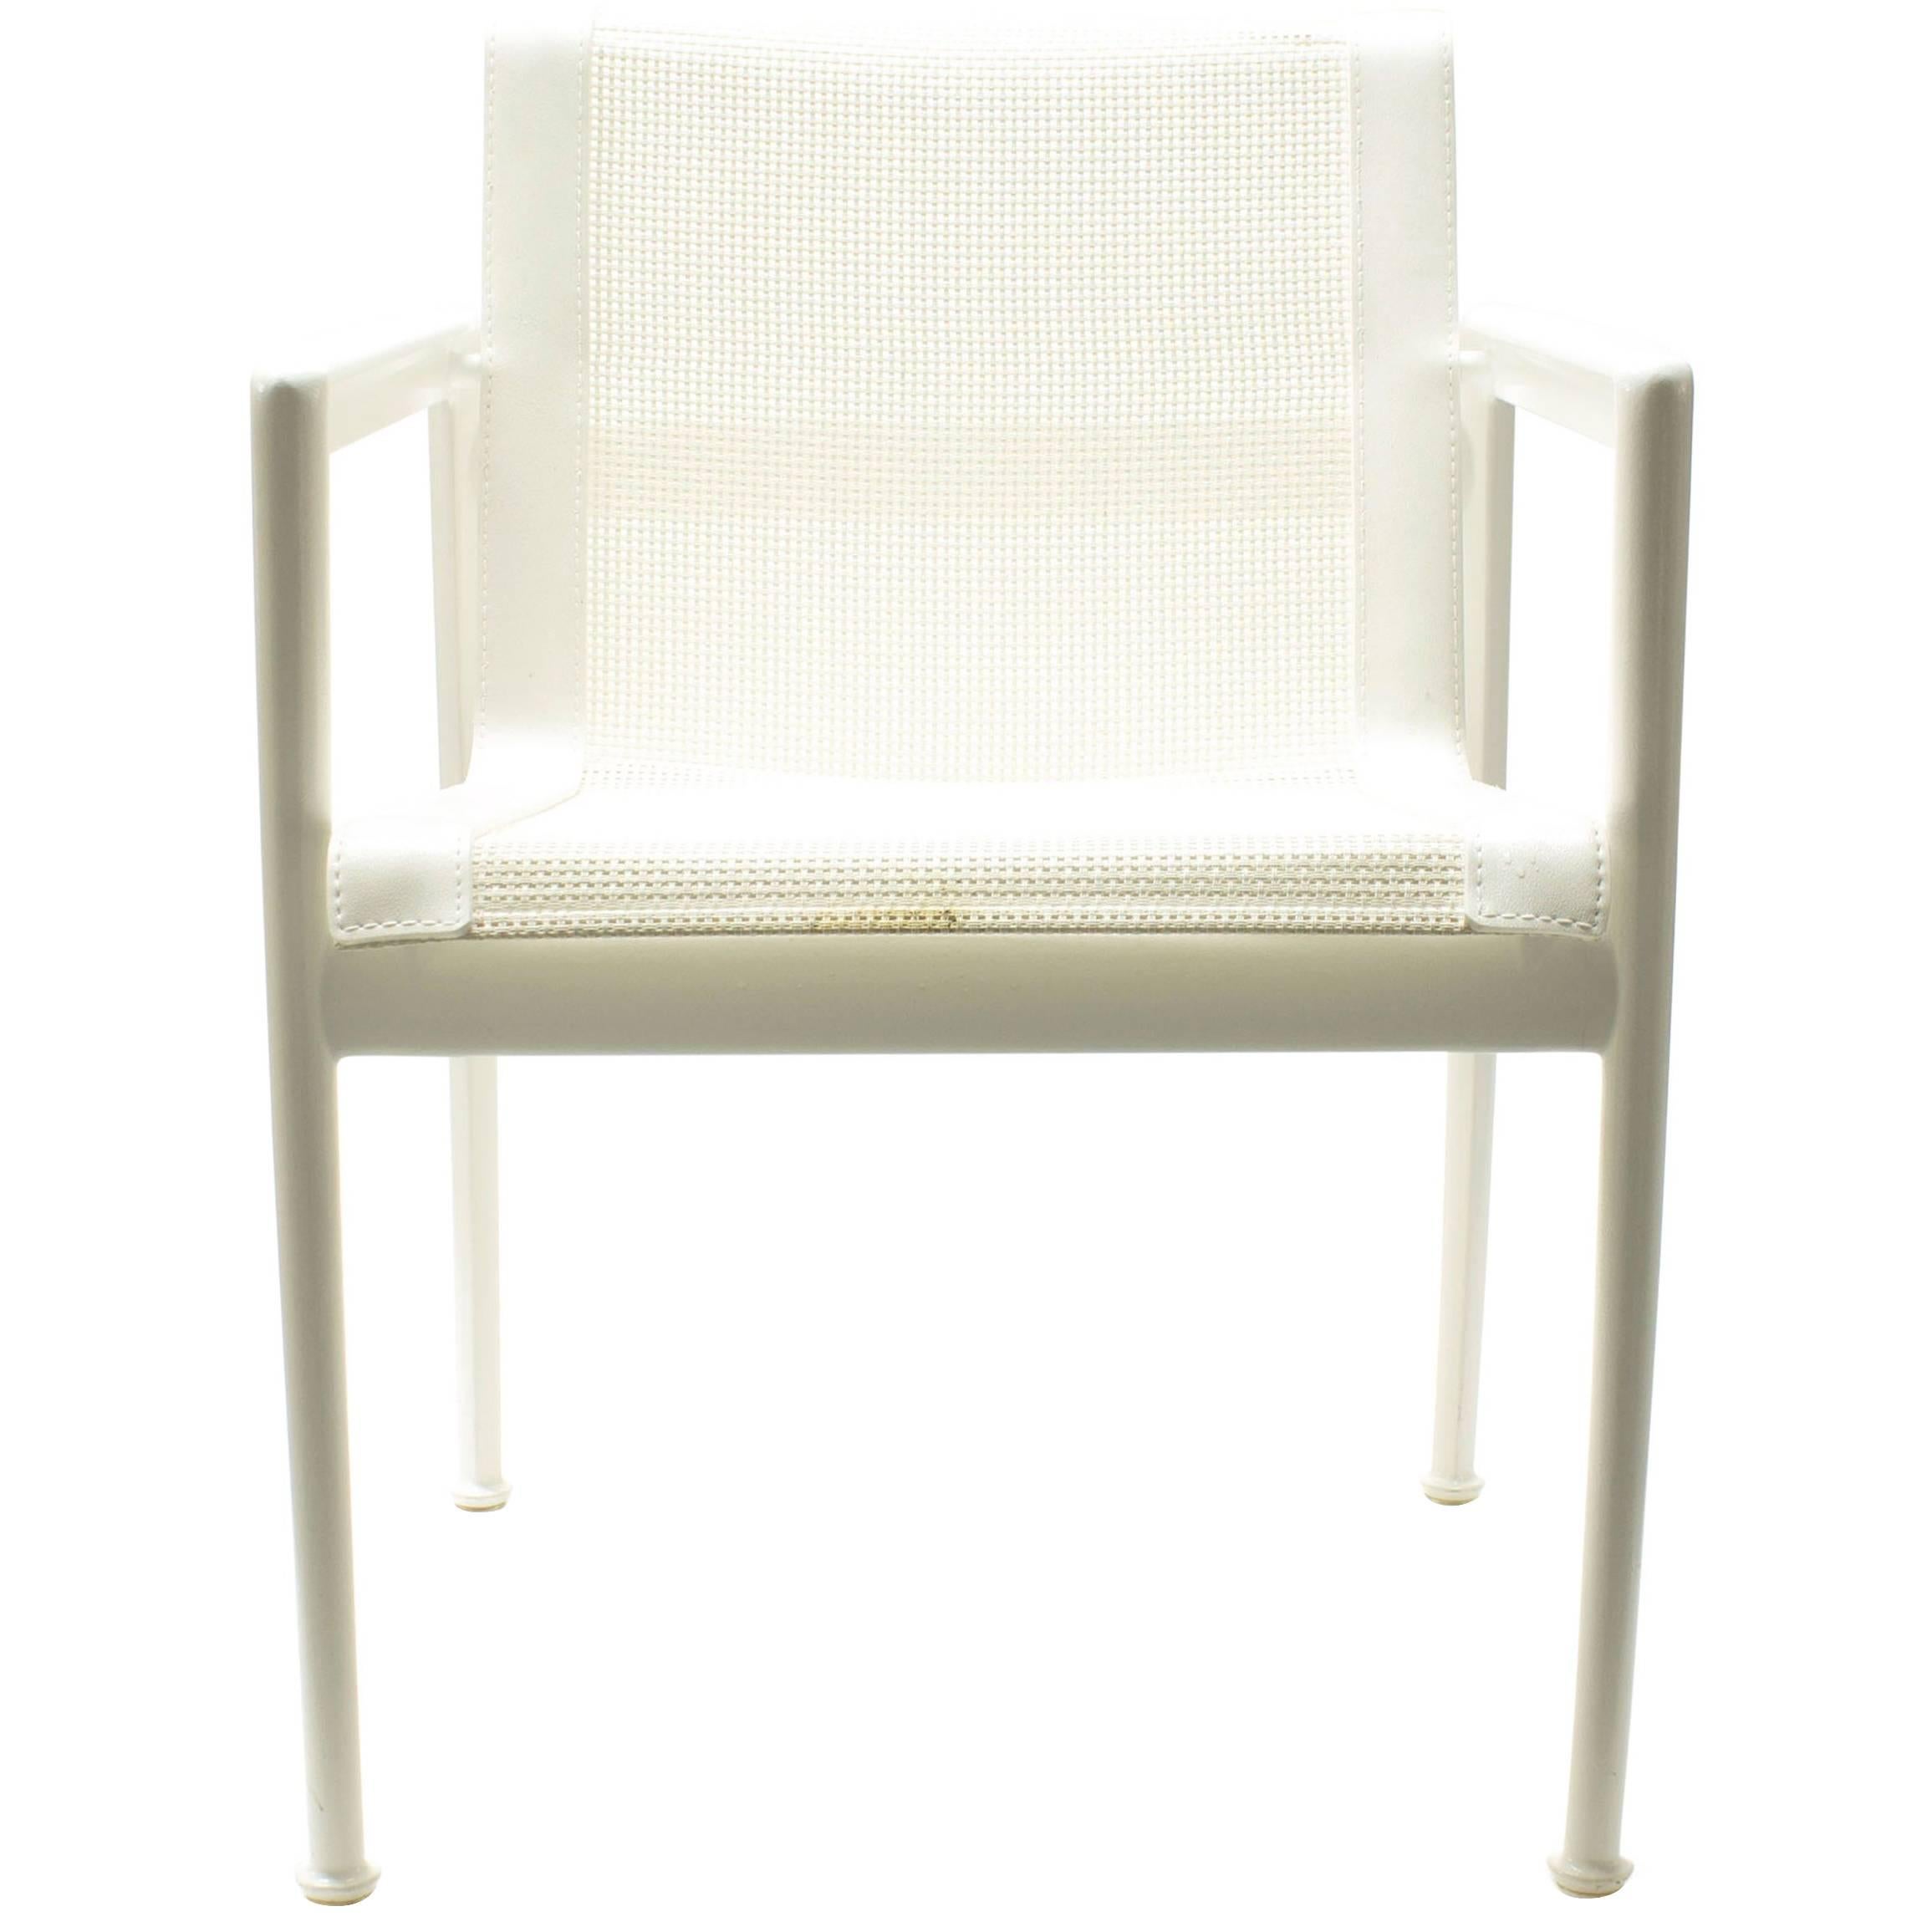 White Richard Schultz 1966 Outdoor Patio Dining Armchair for Knoll, USA For Sale